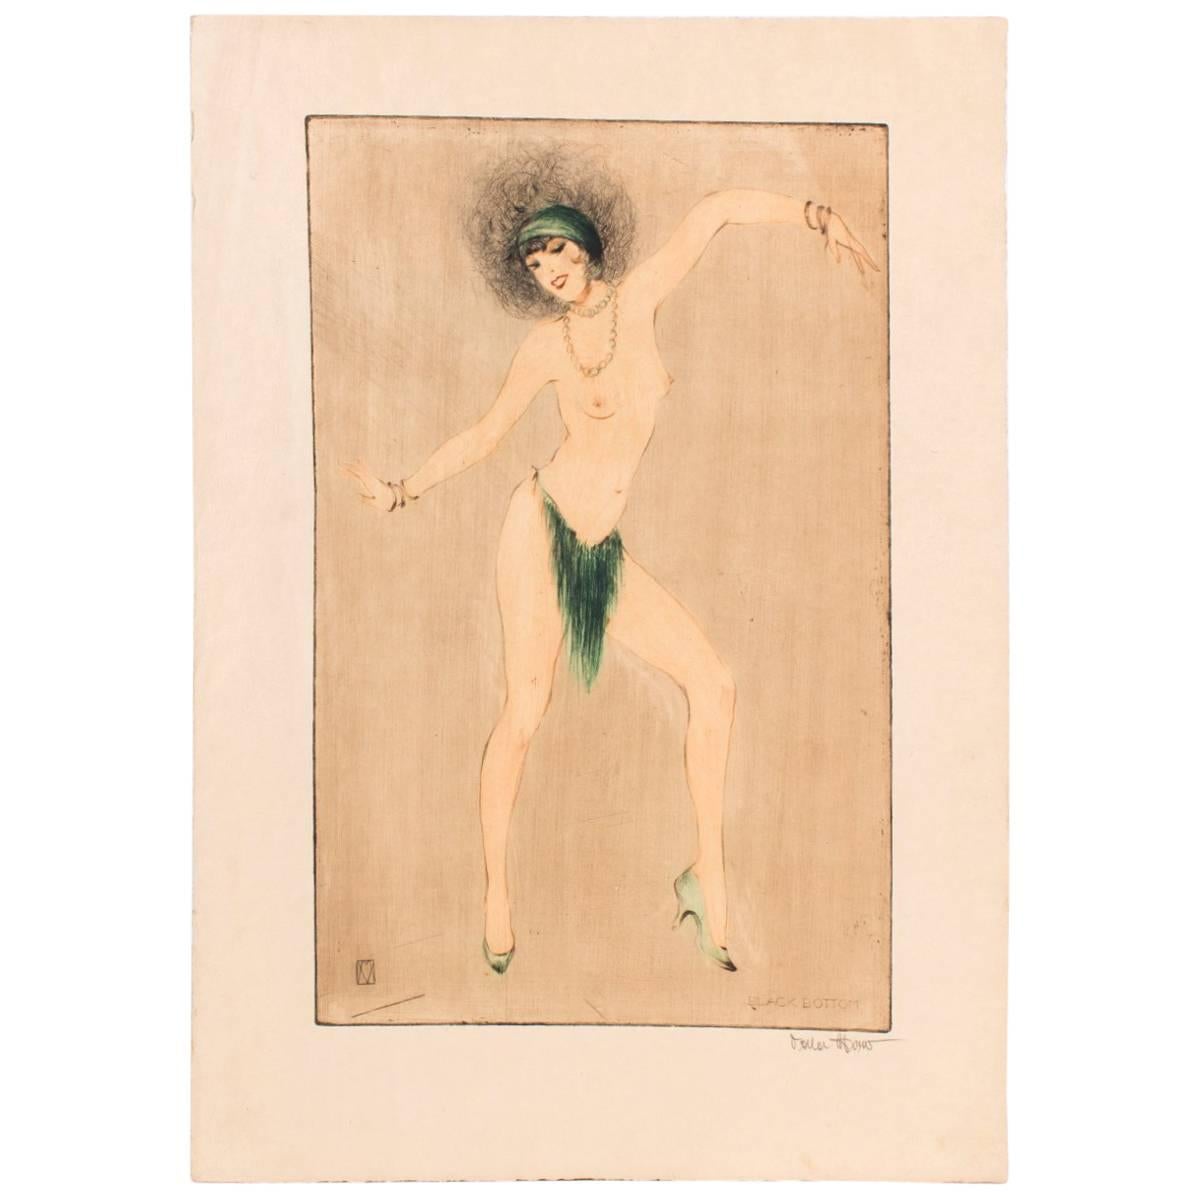 Etching by Vala Moro, Vienna Depicting an Art Deco Dancing Nude Black Bottom For Sale